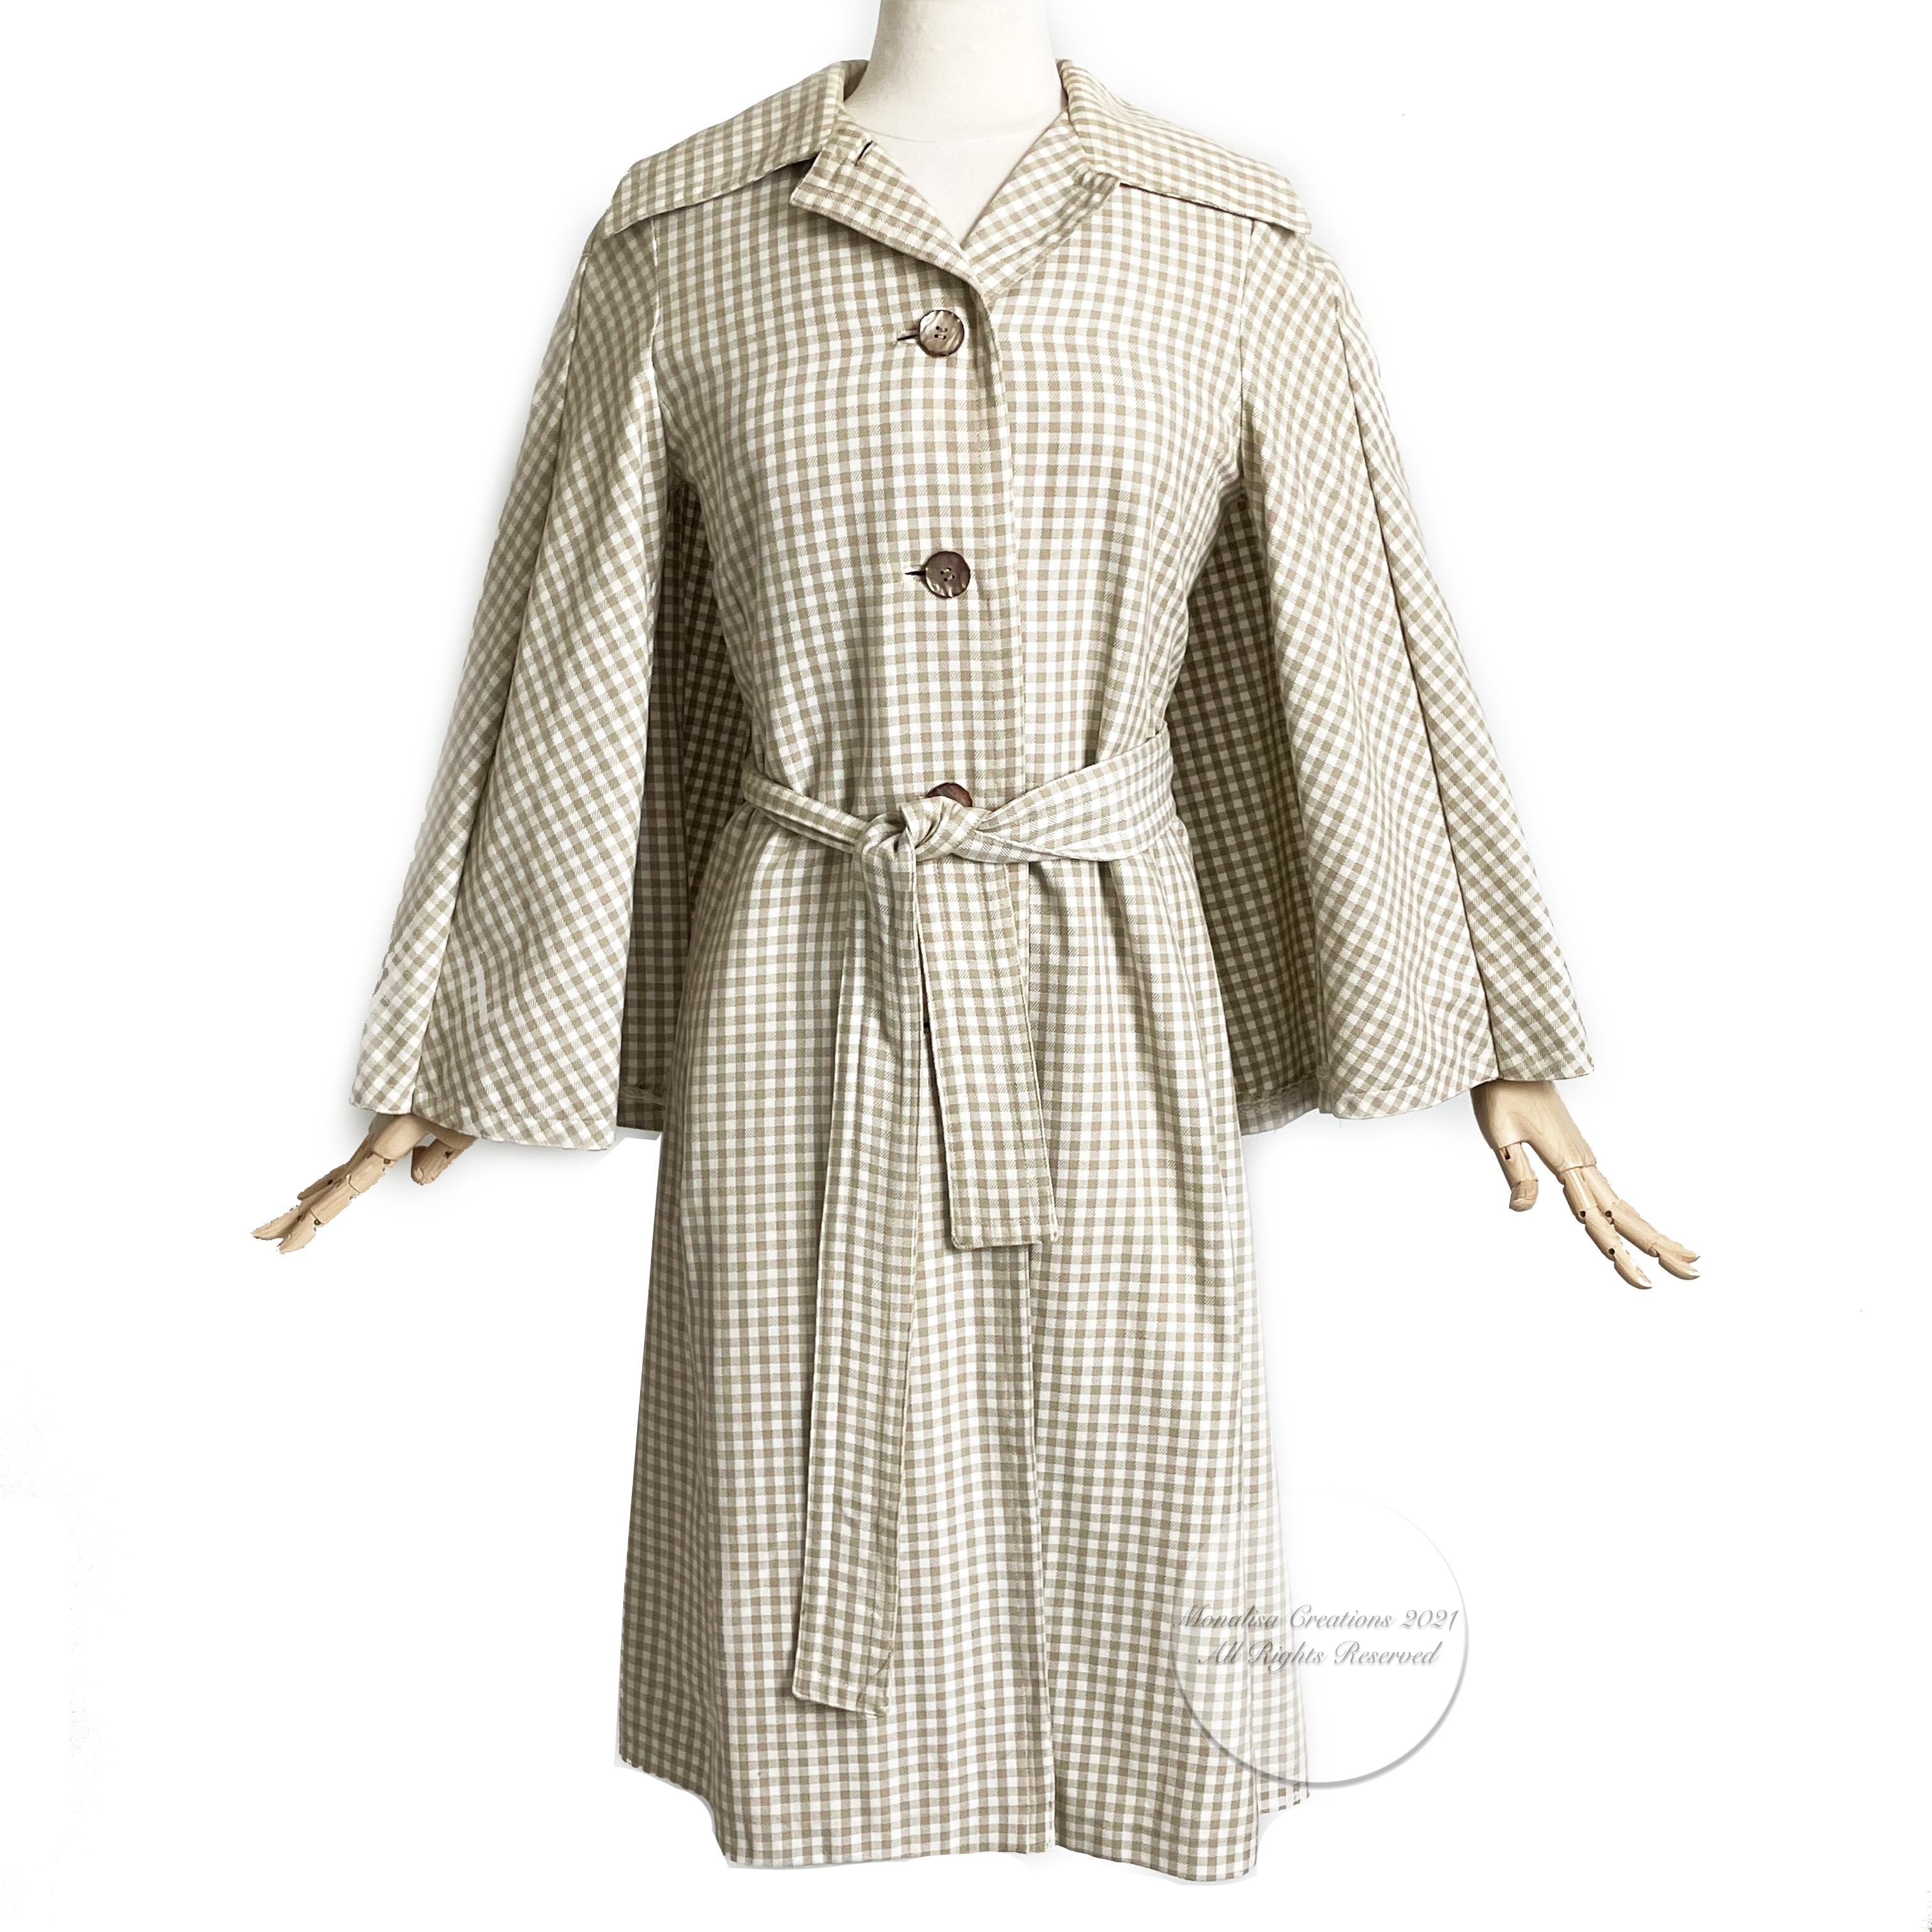 Beige Donald Brooks Trench Coat Jacket with Caplet Check Pattern Vintage 70s 